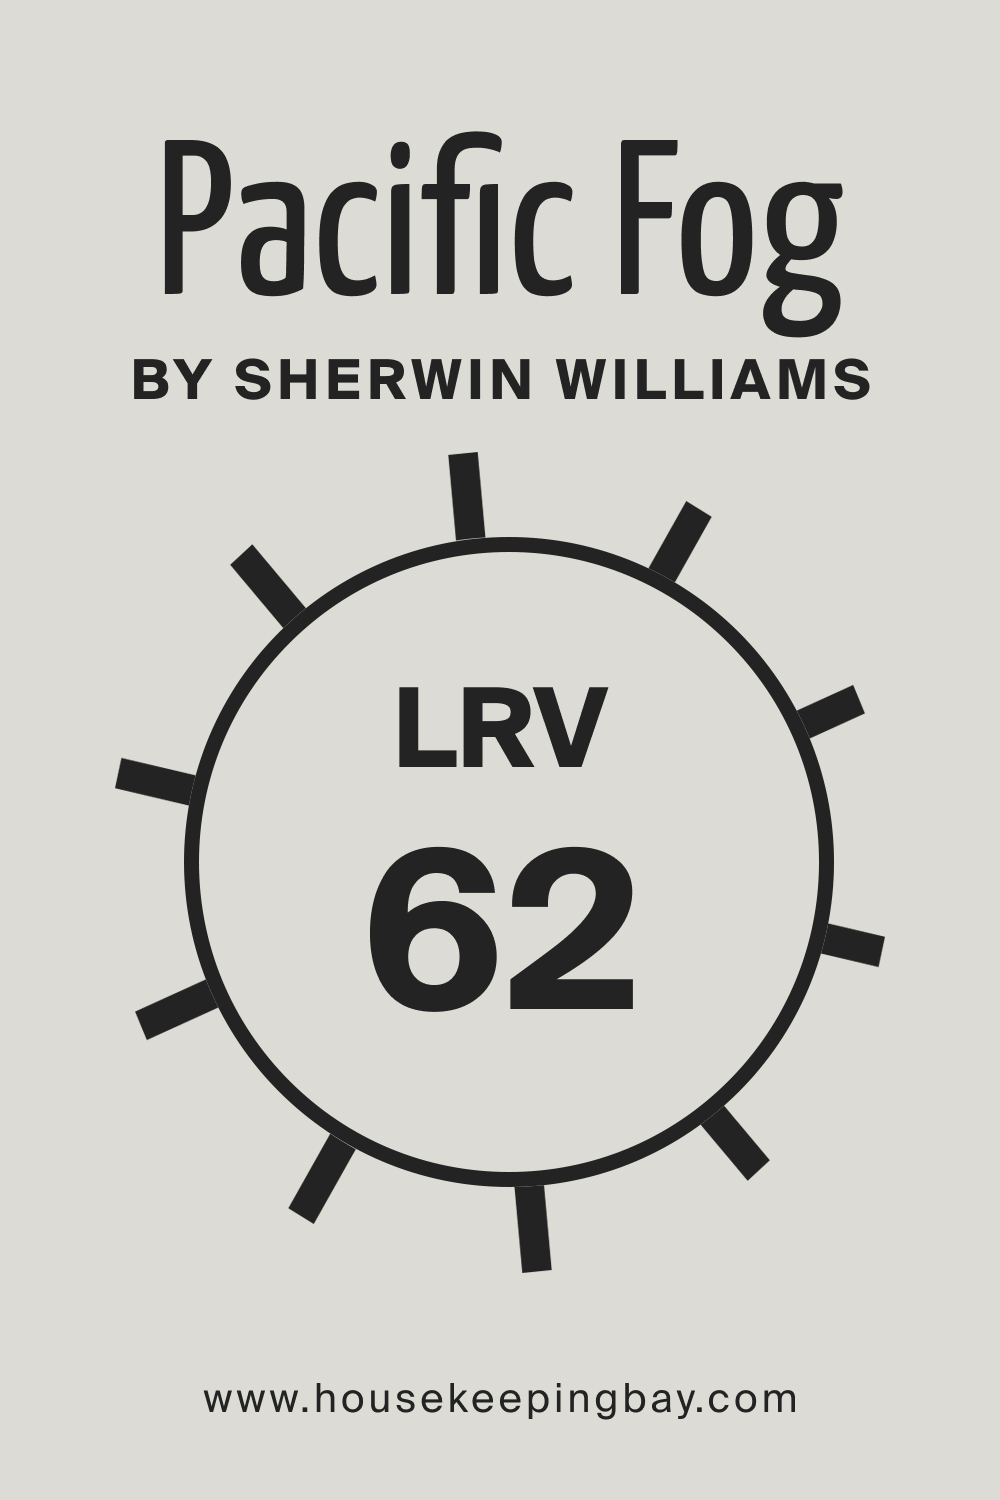 SW 9627 Pacific Fog by Sherwin Williams. LRV 62